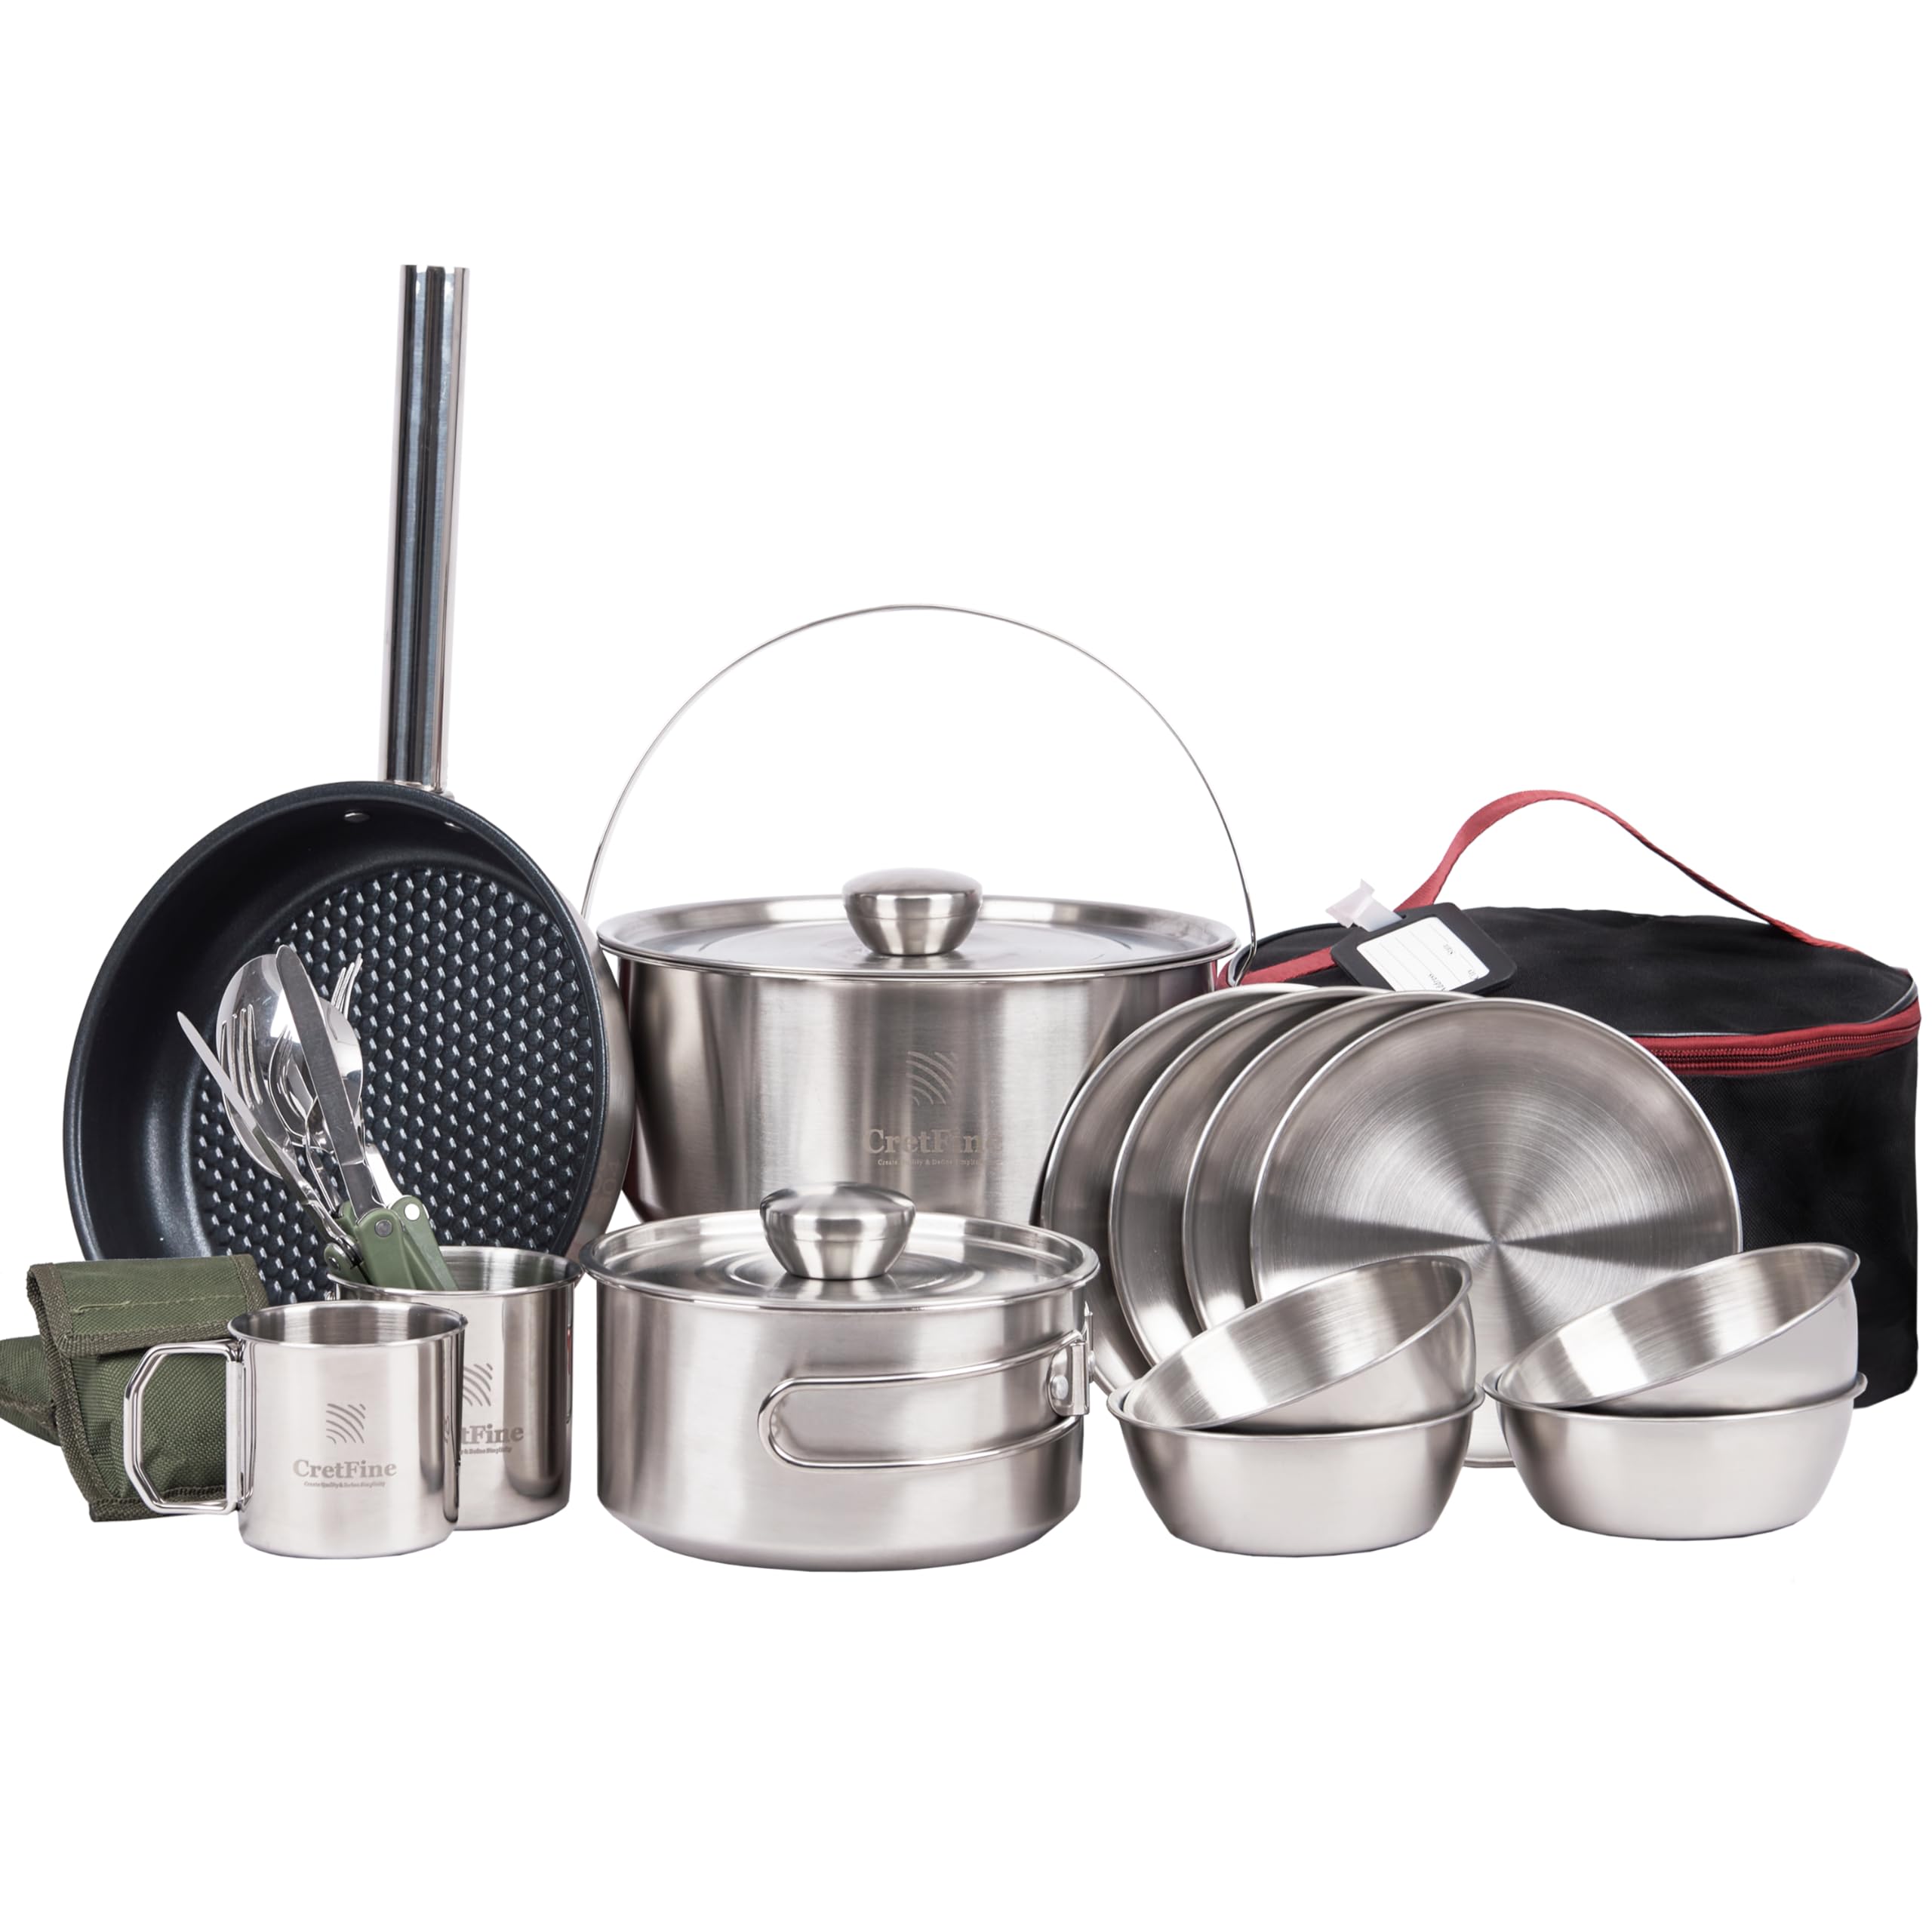 CretFine CampPro Camp Cooking Set for 4-8 Stainless Steel Camping Cookware Set 26Pcs Camp Cooking Equipment with Travel Bag